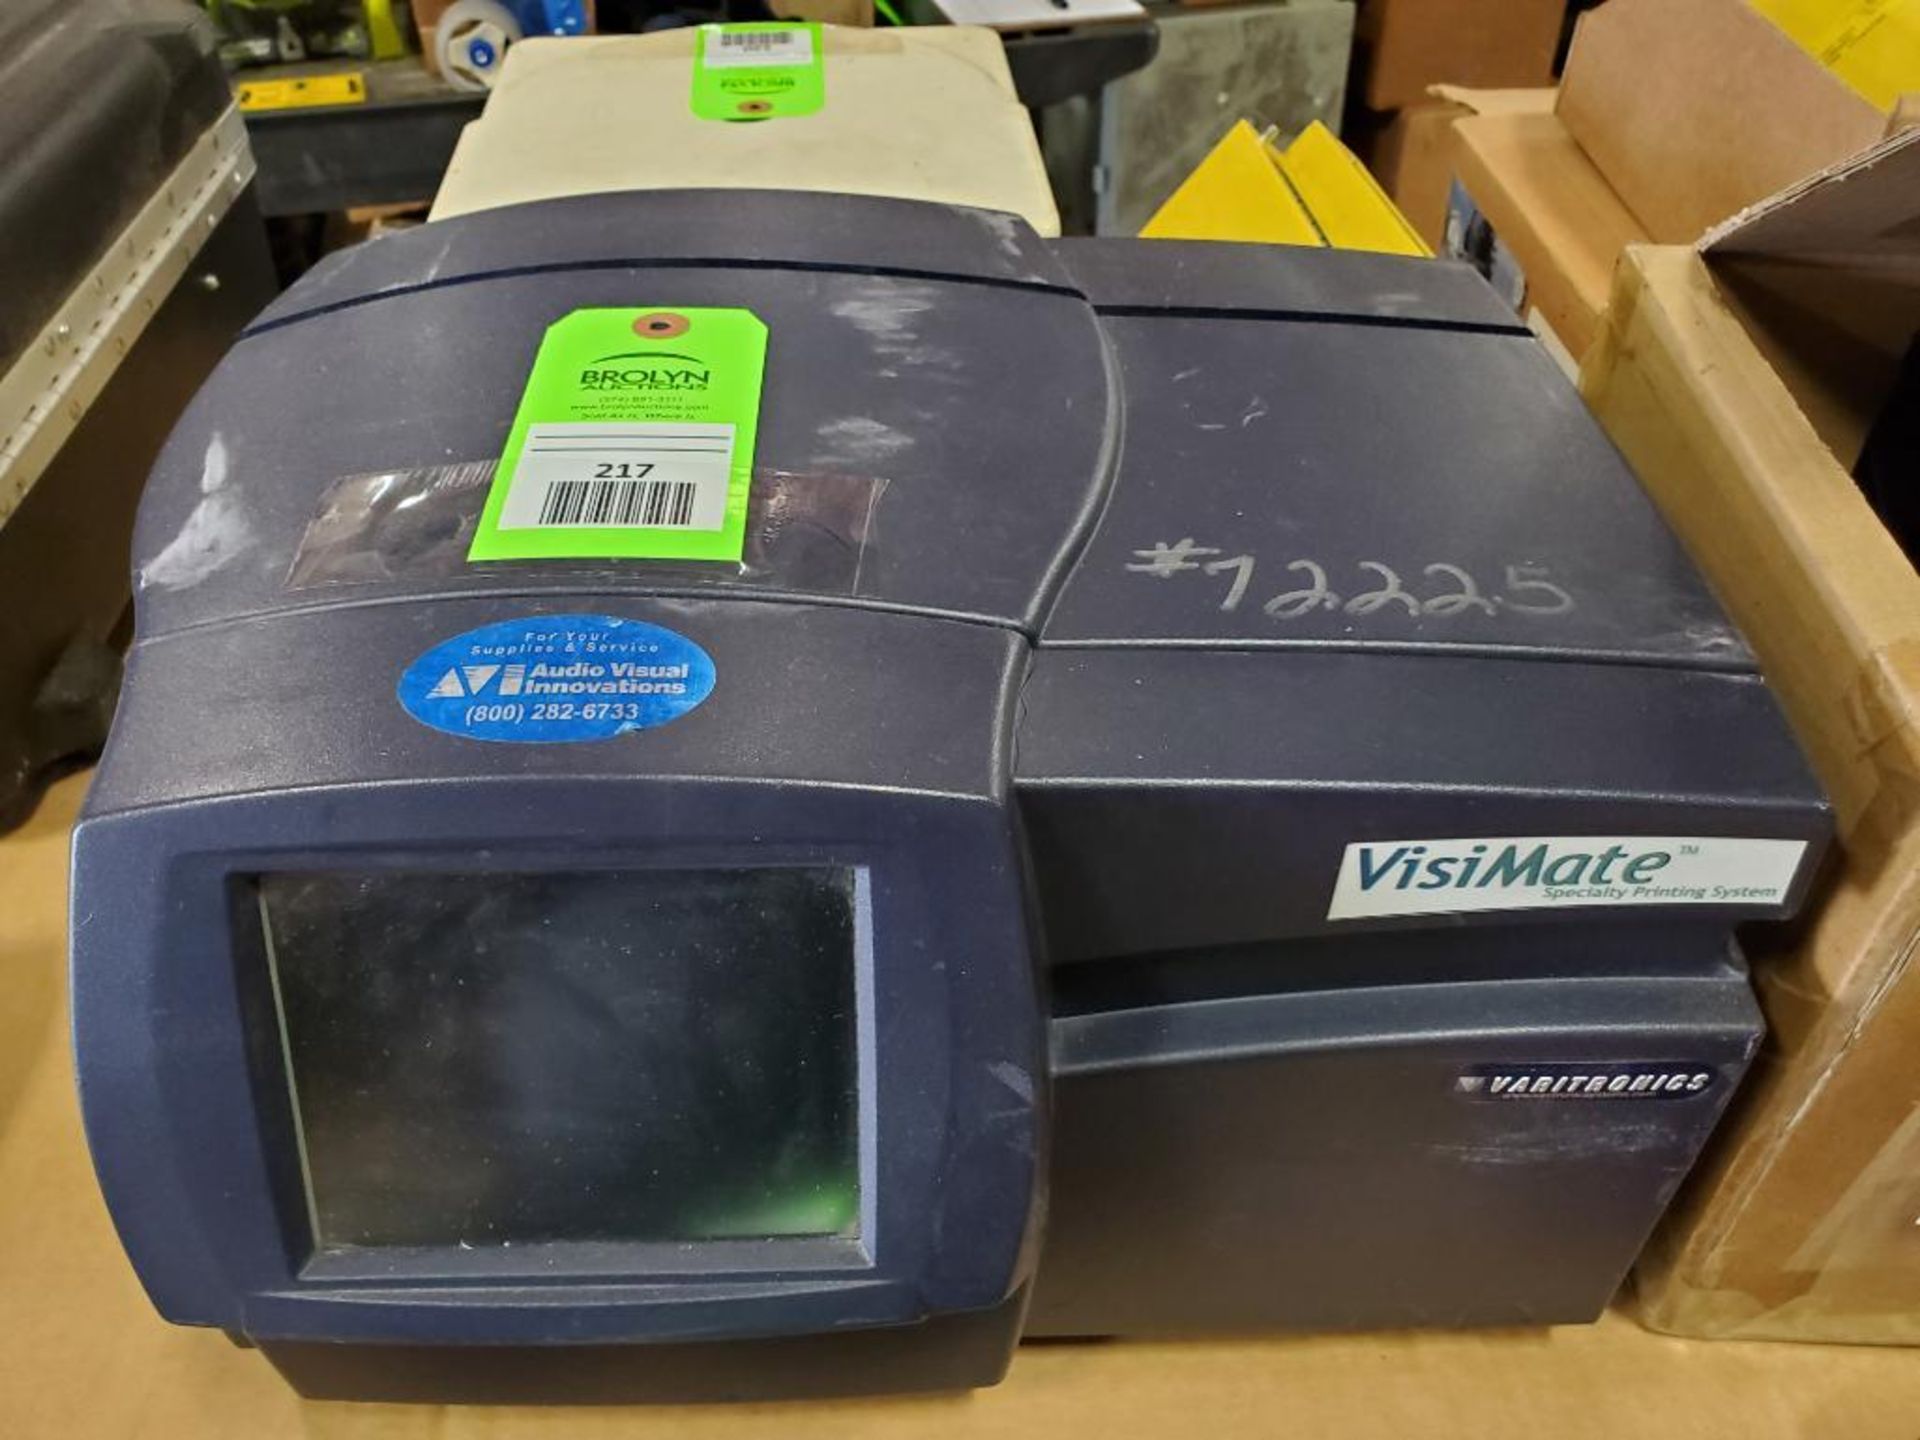 VisiMate Specialty Printing Varitronics MGL label and sign maker 3.